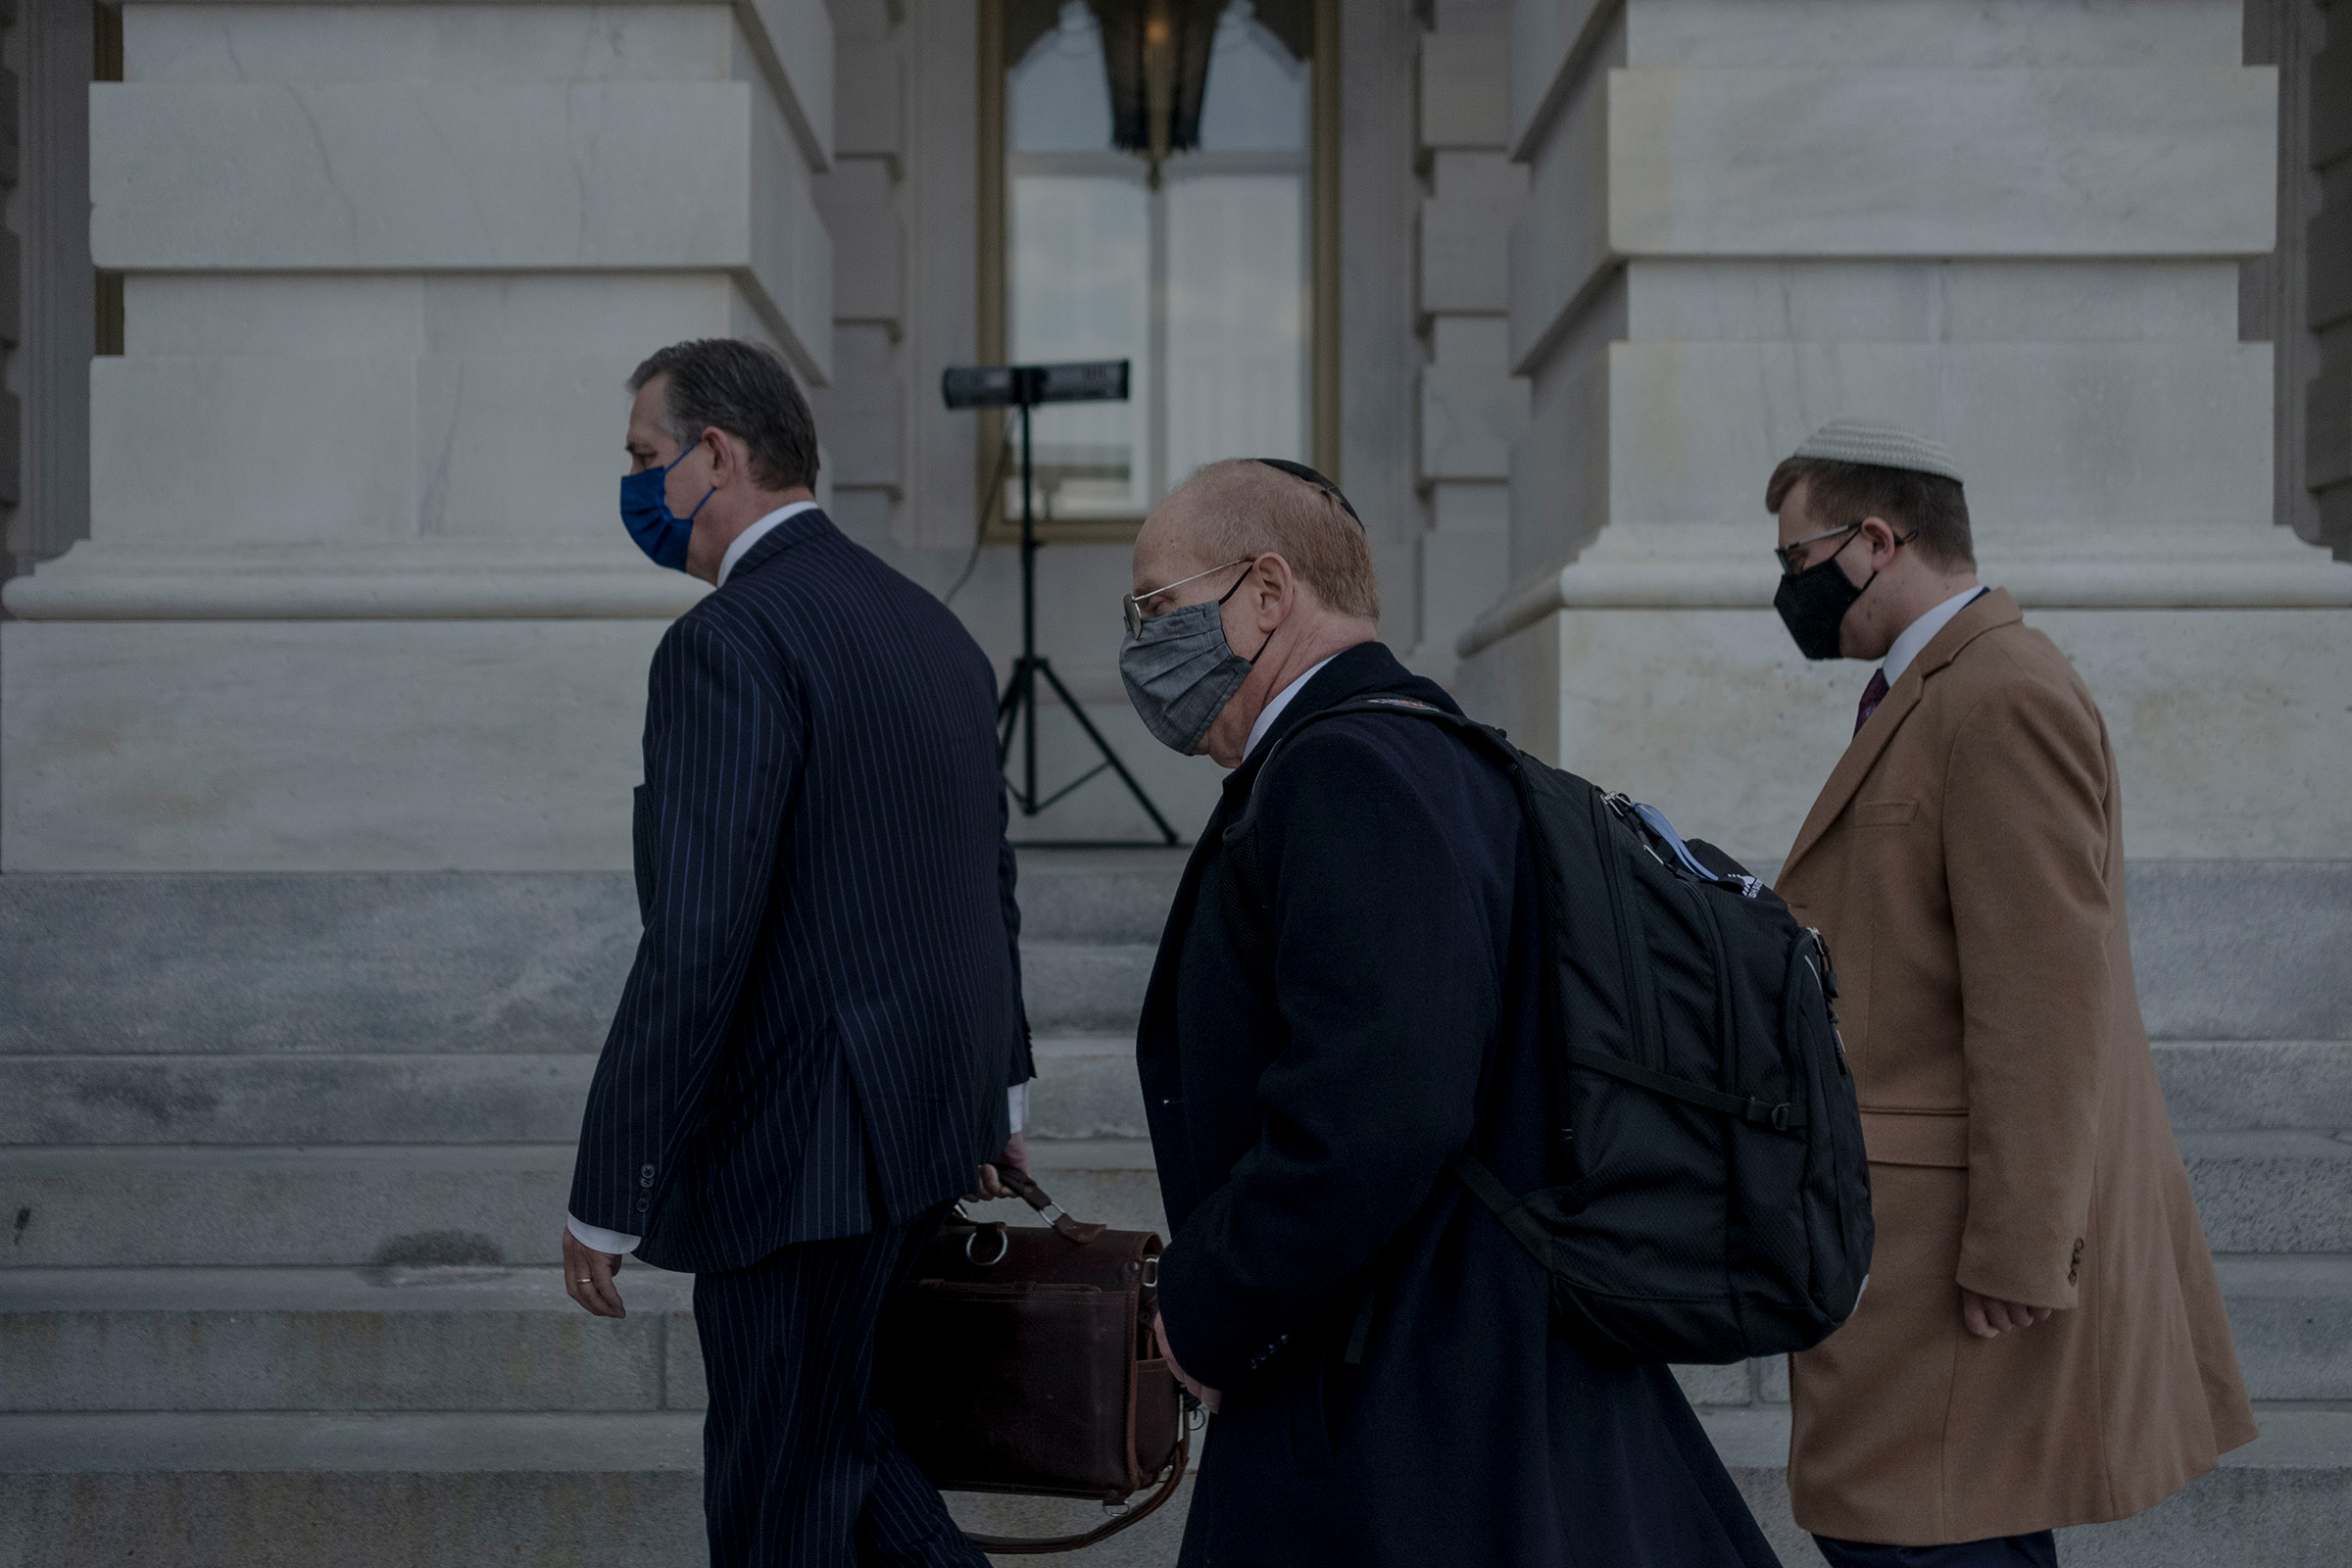 2/10/21, Washington, D.C. Attorneys for former President Donald Trump, Bruce Castor and David Schoen arrive prior to the start of the impeachment trial at the Capitol in Washington, D.C. on Feb. 10, 2021. Gabriella Demczuk / TIME